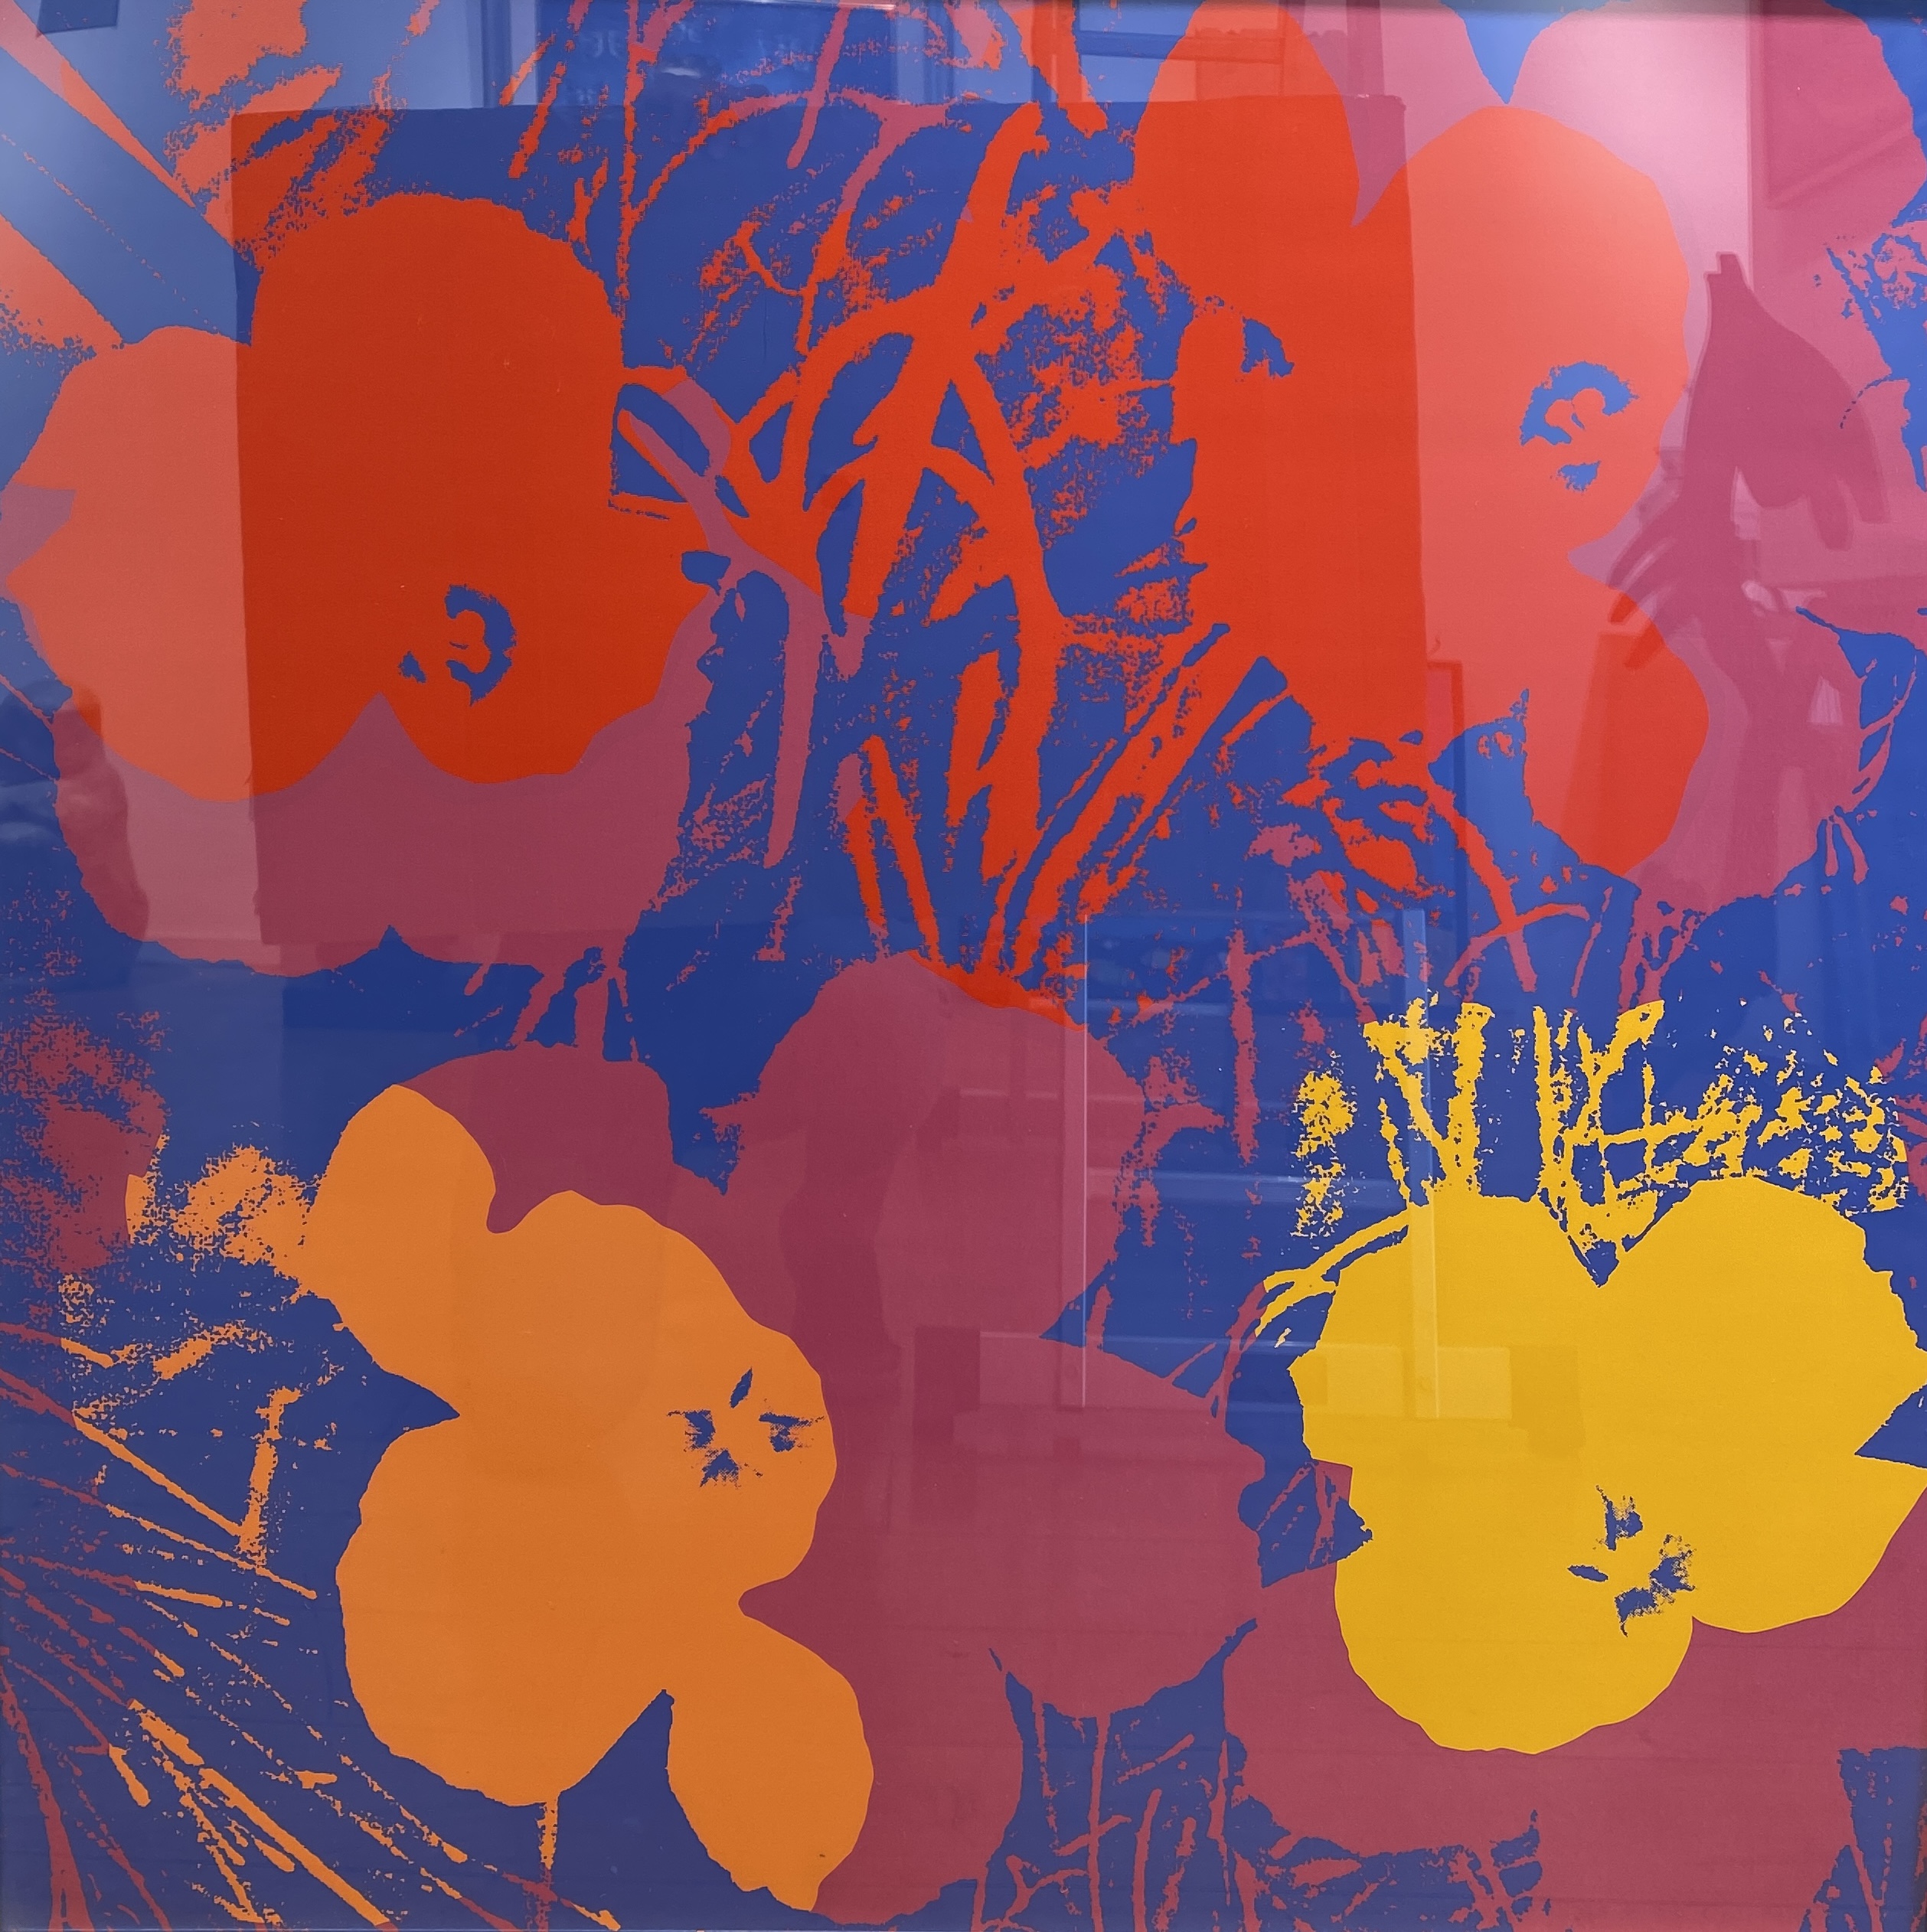 “Flowers print” by Andy Warhol